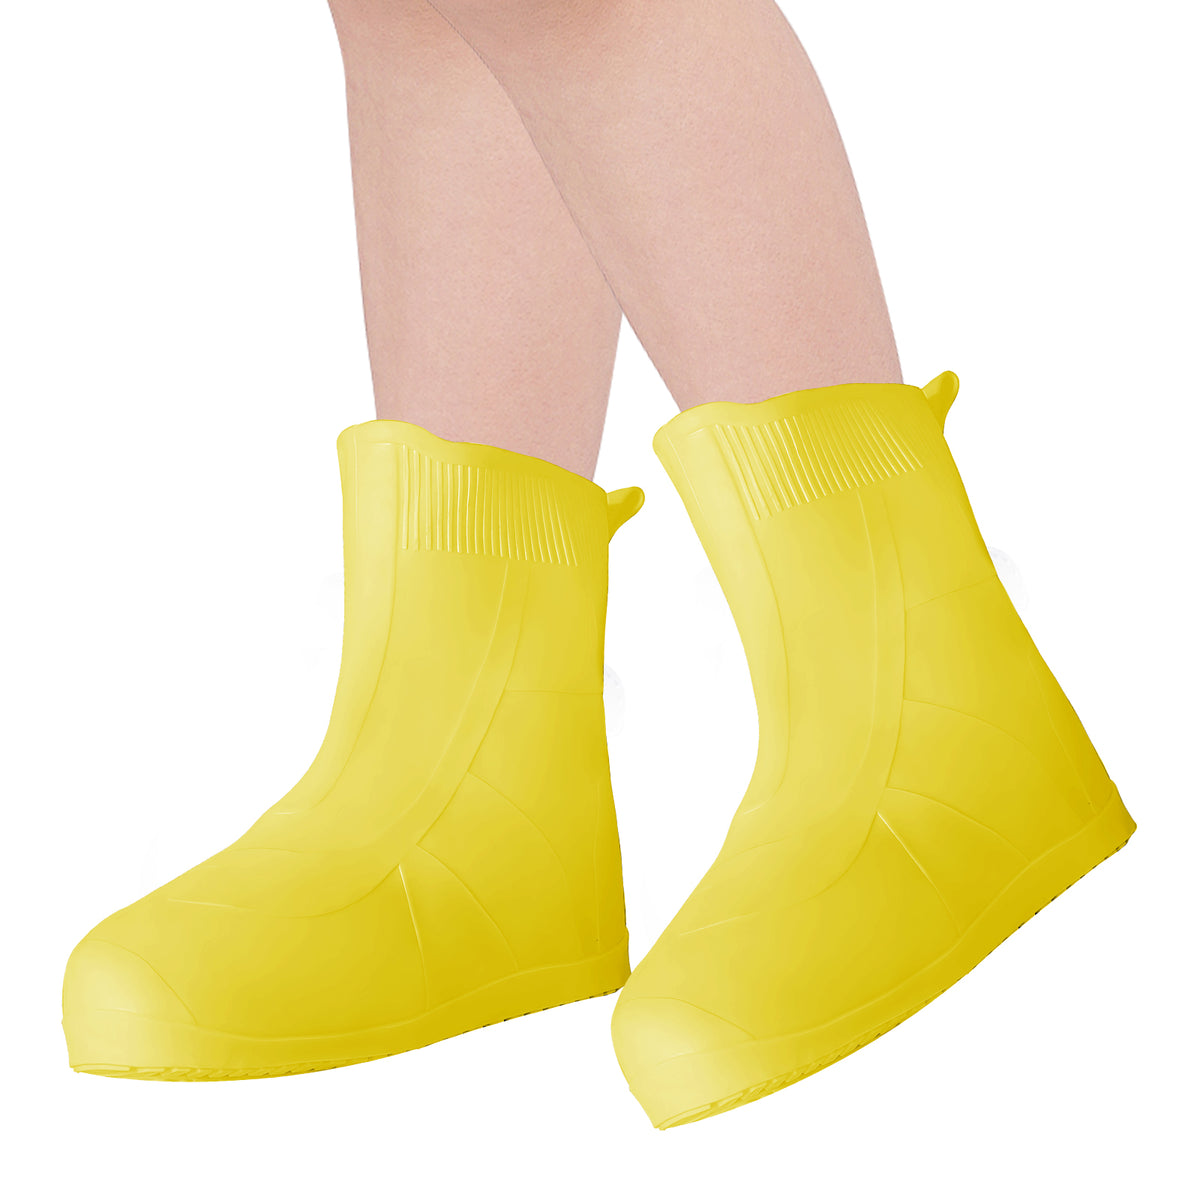 Adorila Kid Rain Silicone Shoe Covers, Anti-Slip Wear-Resistant and Portable Waterproof Shoe Covers, Kid Shoe Covers for Outdoor Home Travel Rain Boots (Yellow, S)